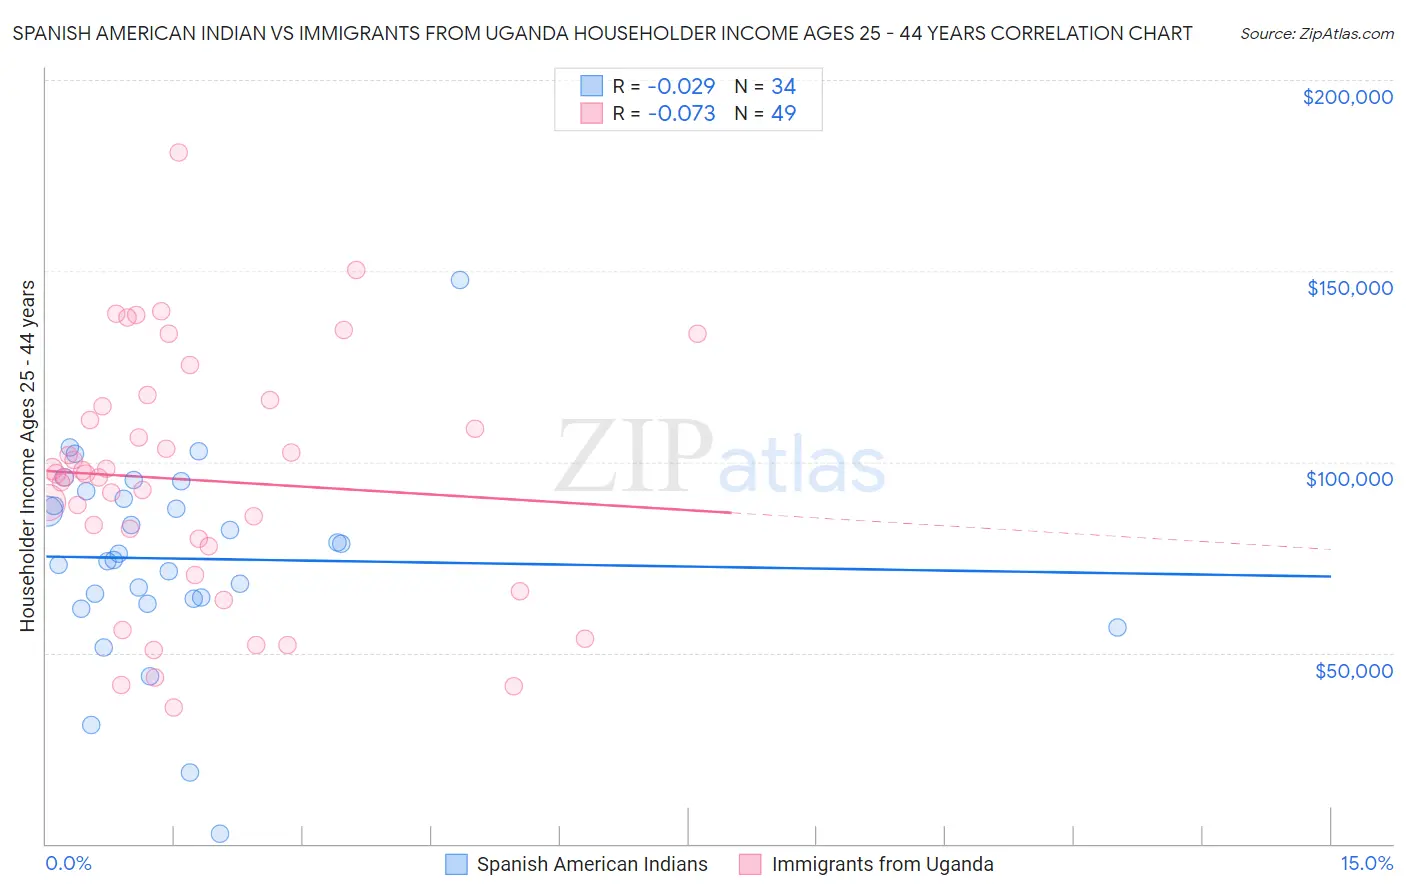 Spanish American Indian vs Immigrants from Uganda Householder Income Ages 25 - 44 years